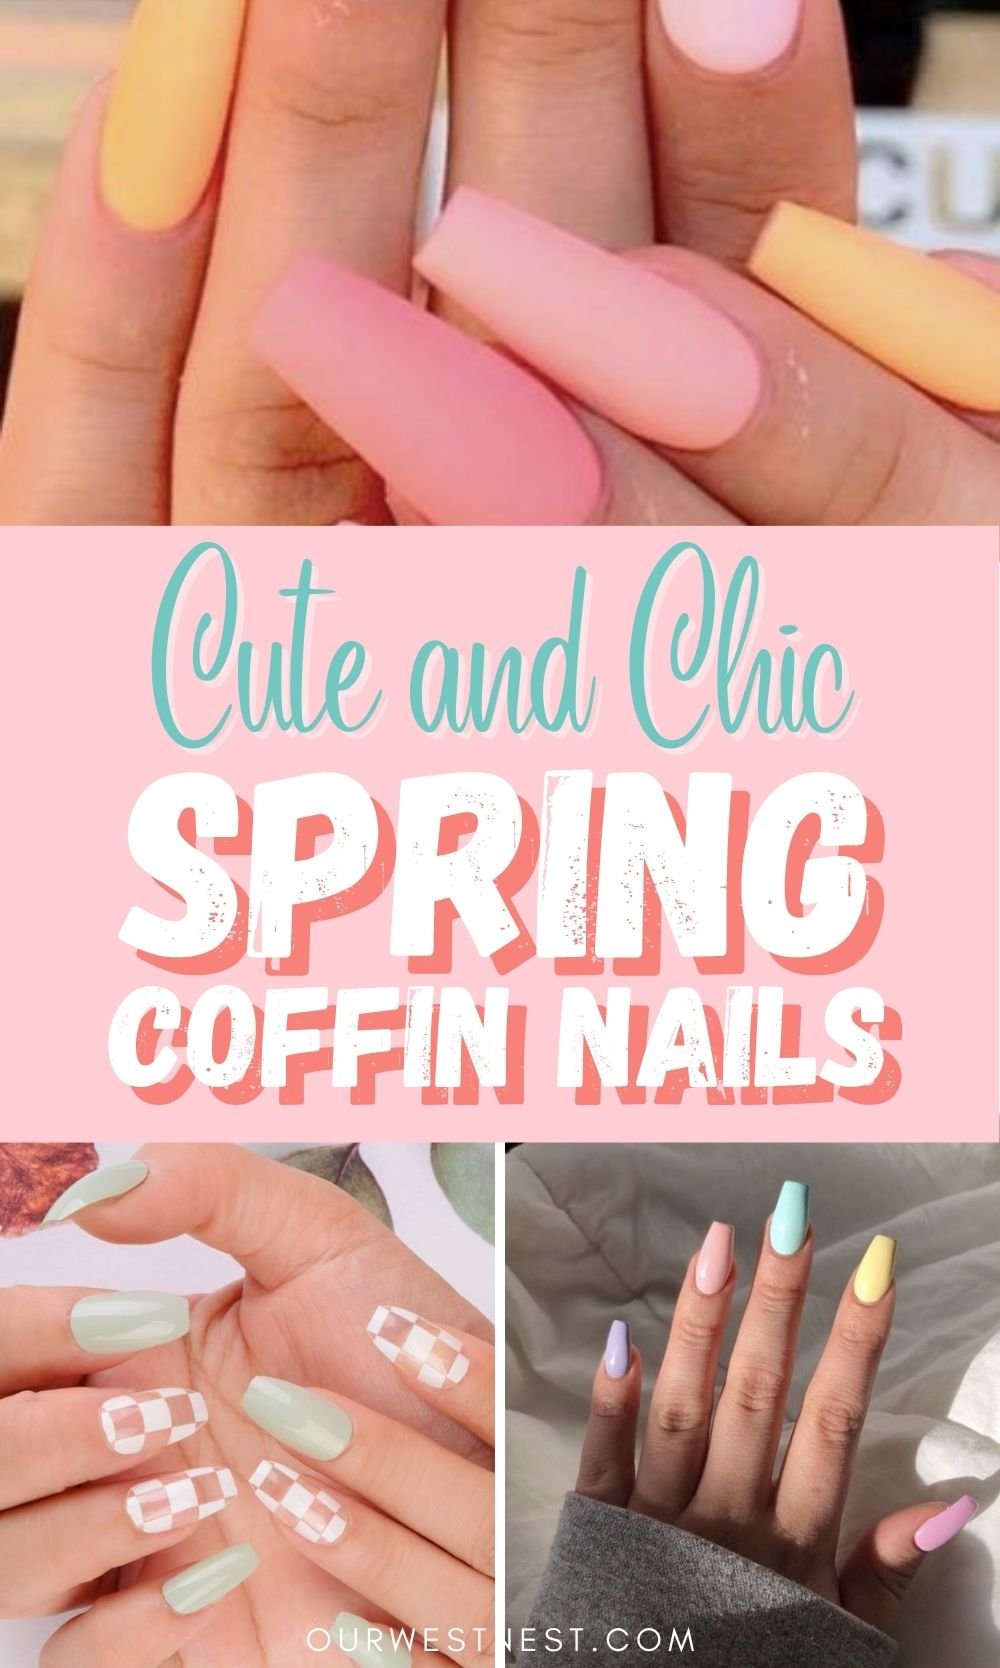 35 Cute Coffin Nails Ideas to Copy for Your Next Manicure  Fashionterest